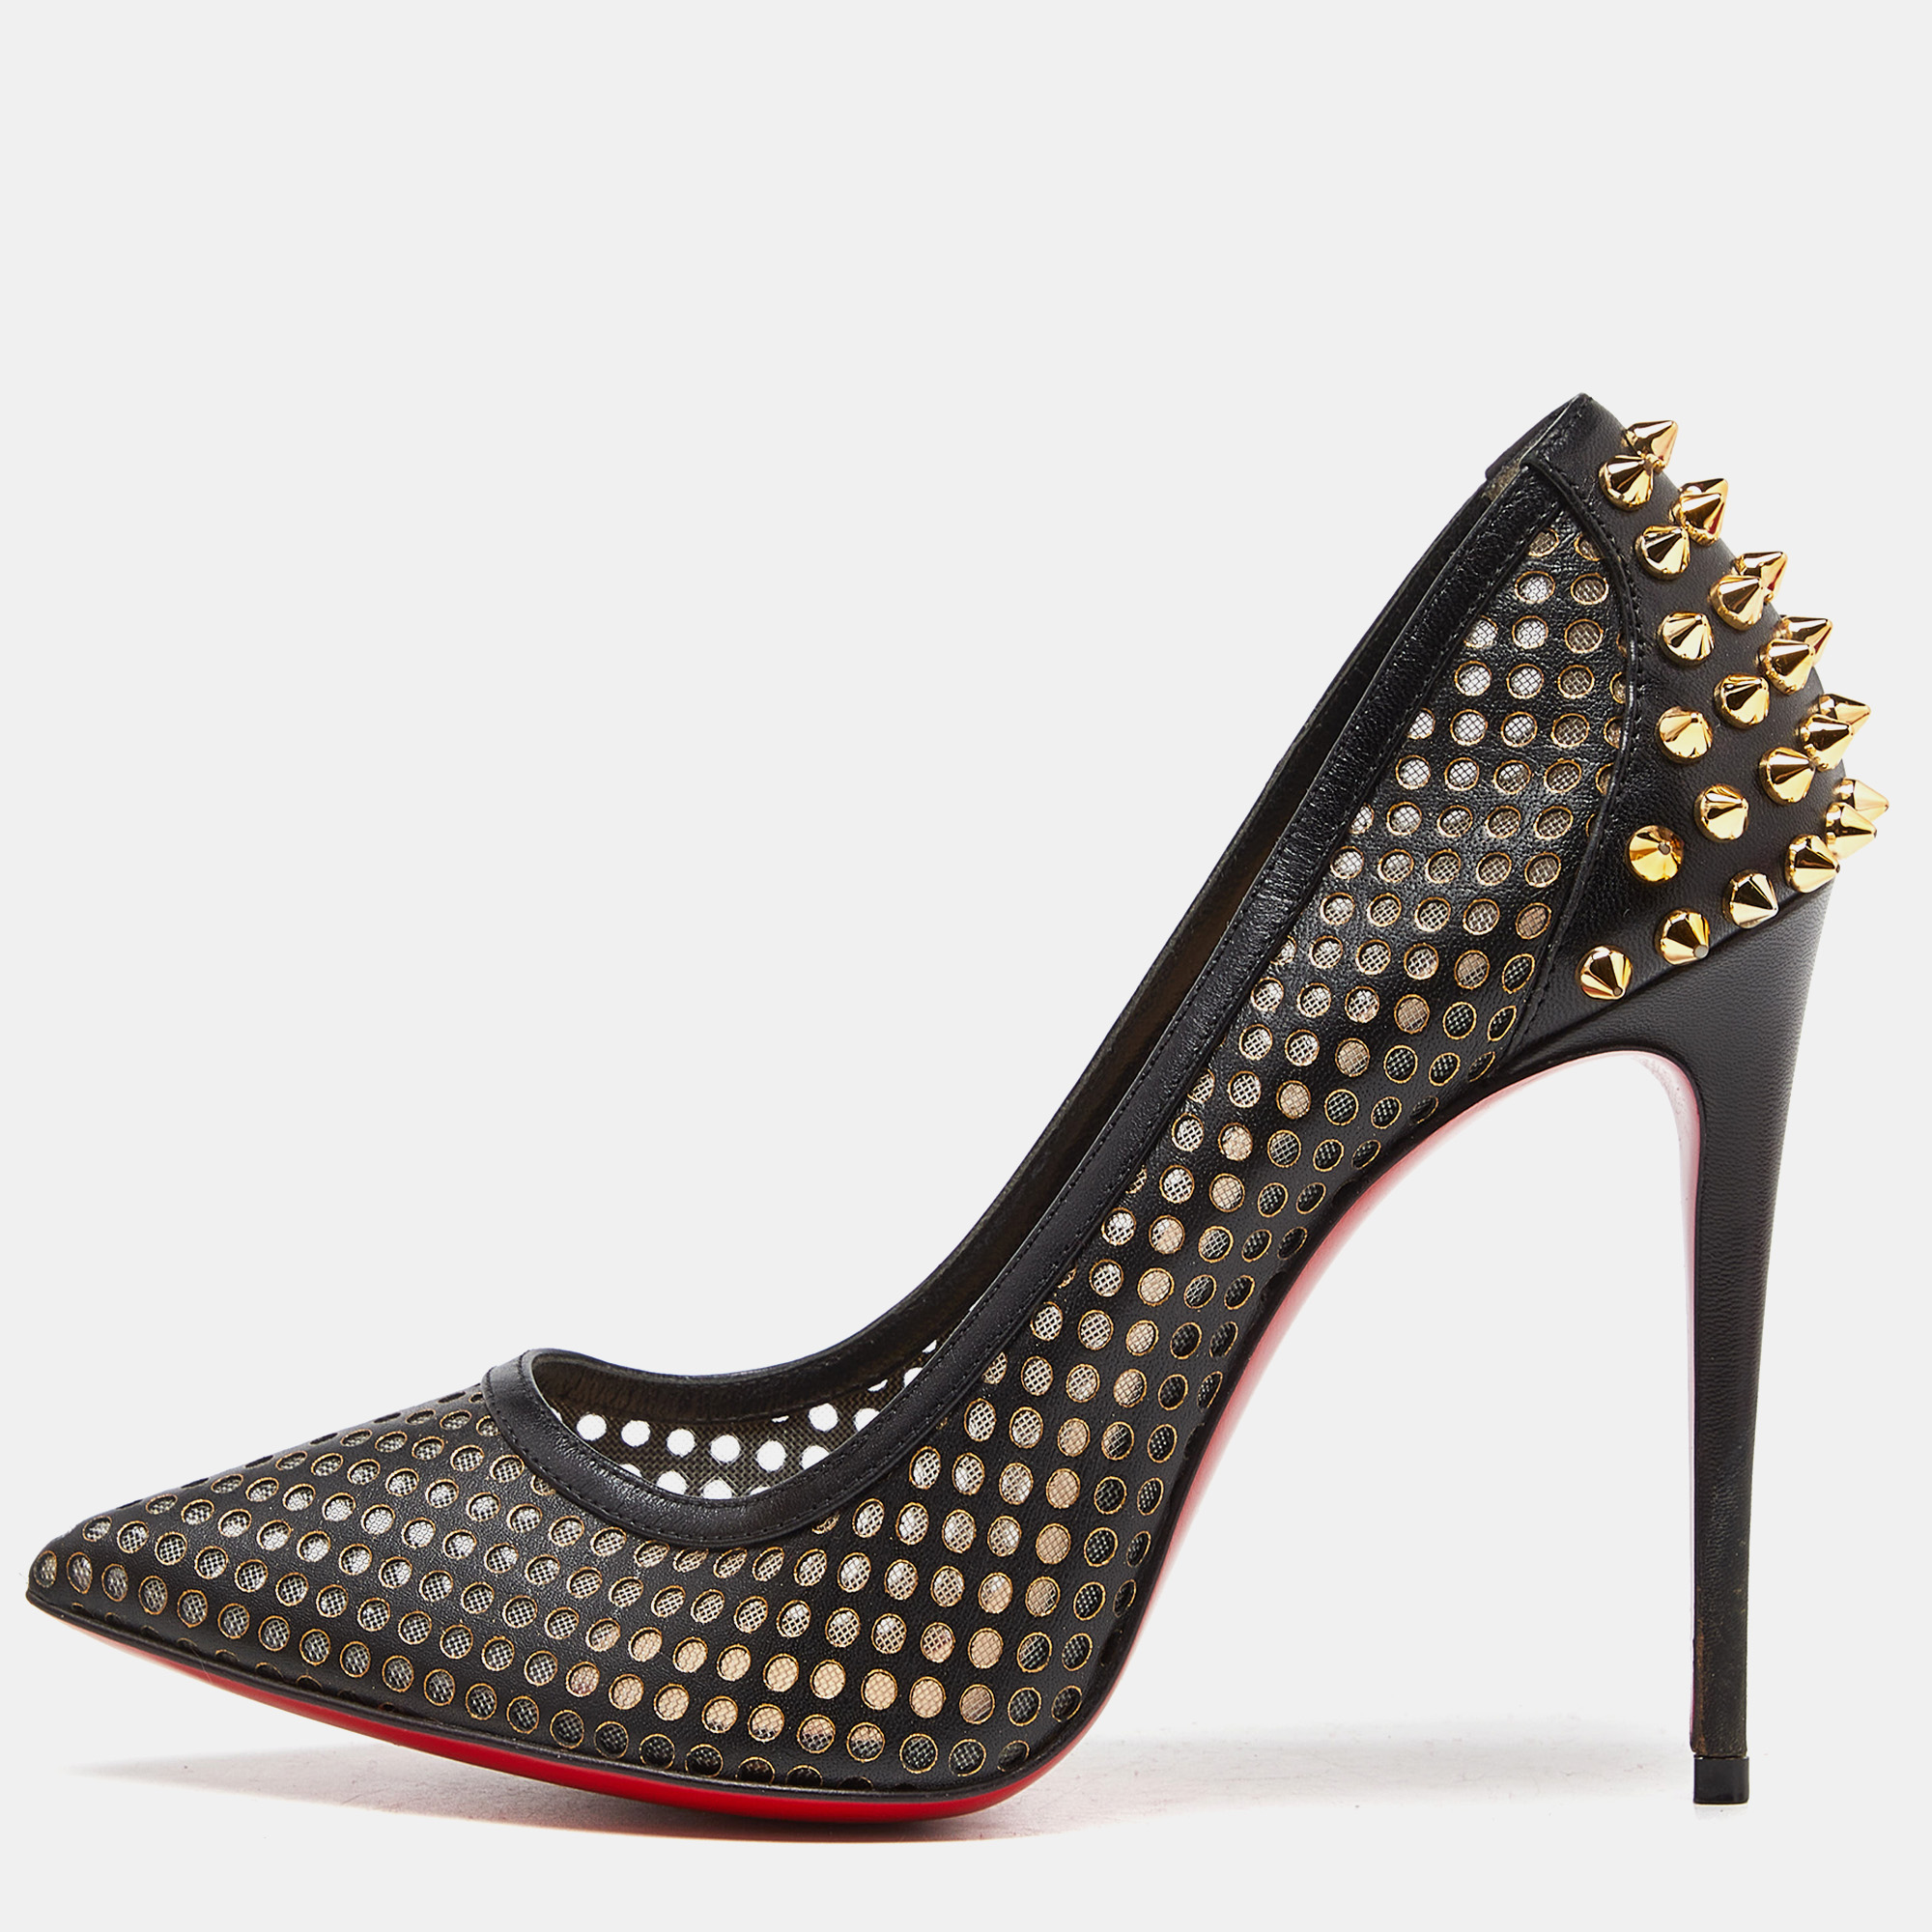 Pre-owned Christian Louboutin Black Perforated Leather Spiked Guni Pumps Size 37